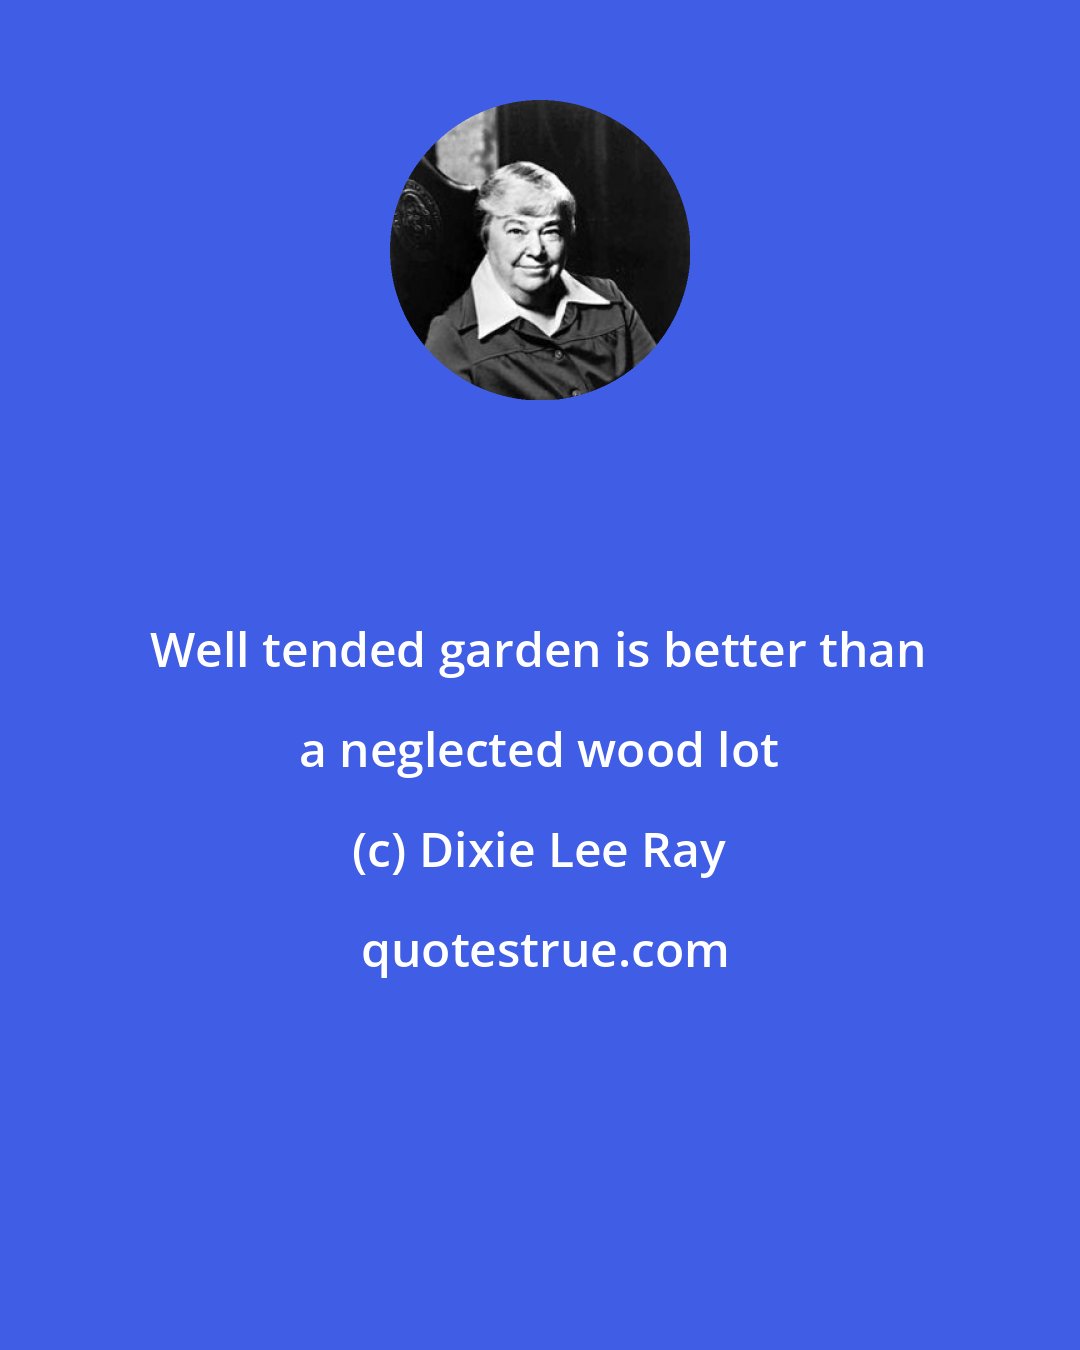 Dixie Lee Ray: Well tended garden is better than a neglected wood lot